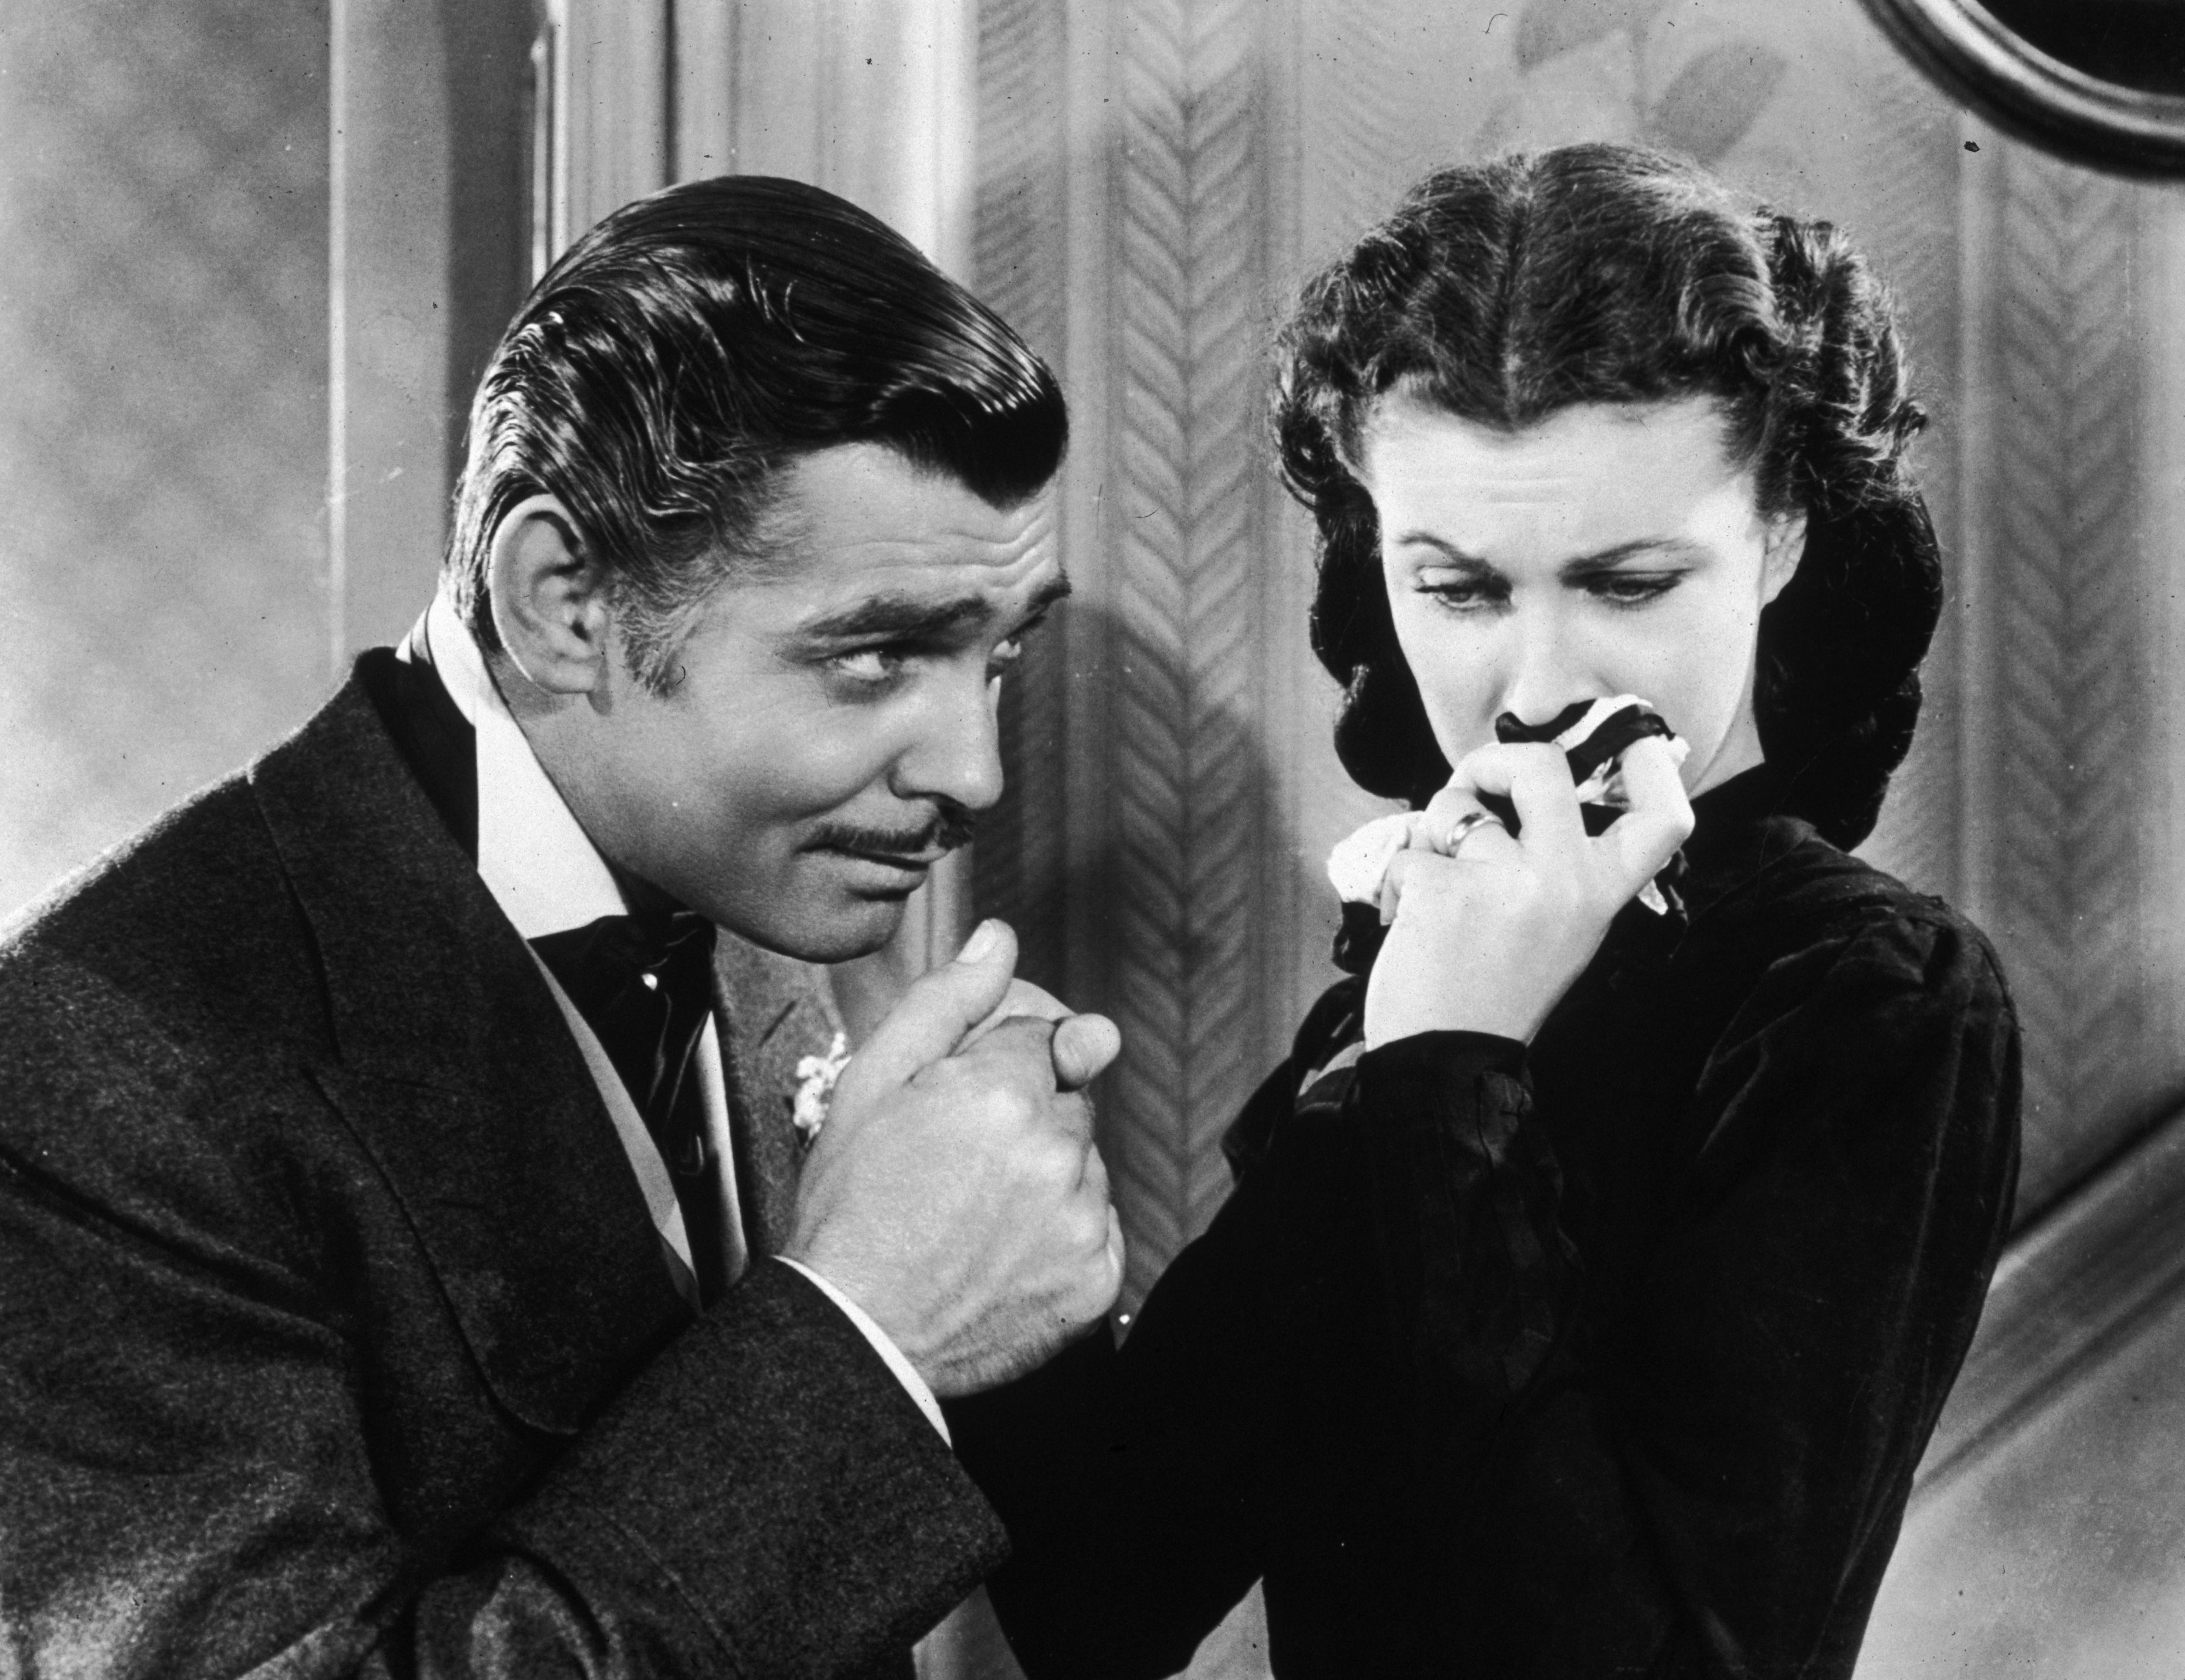 Clark Gable as Rhett Butler with  Vivien Leigh as Scarlett O'Hara in 'Gone With The Wind' | Source: Getty Images